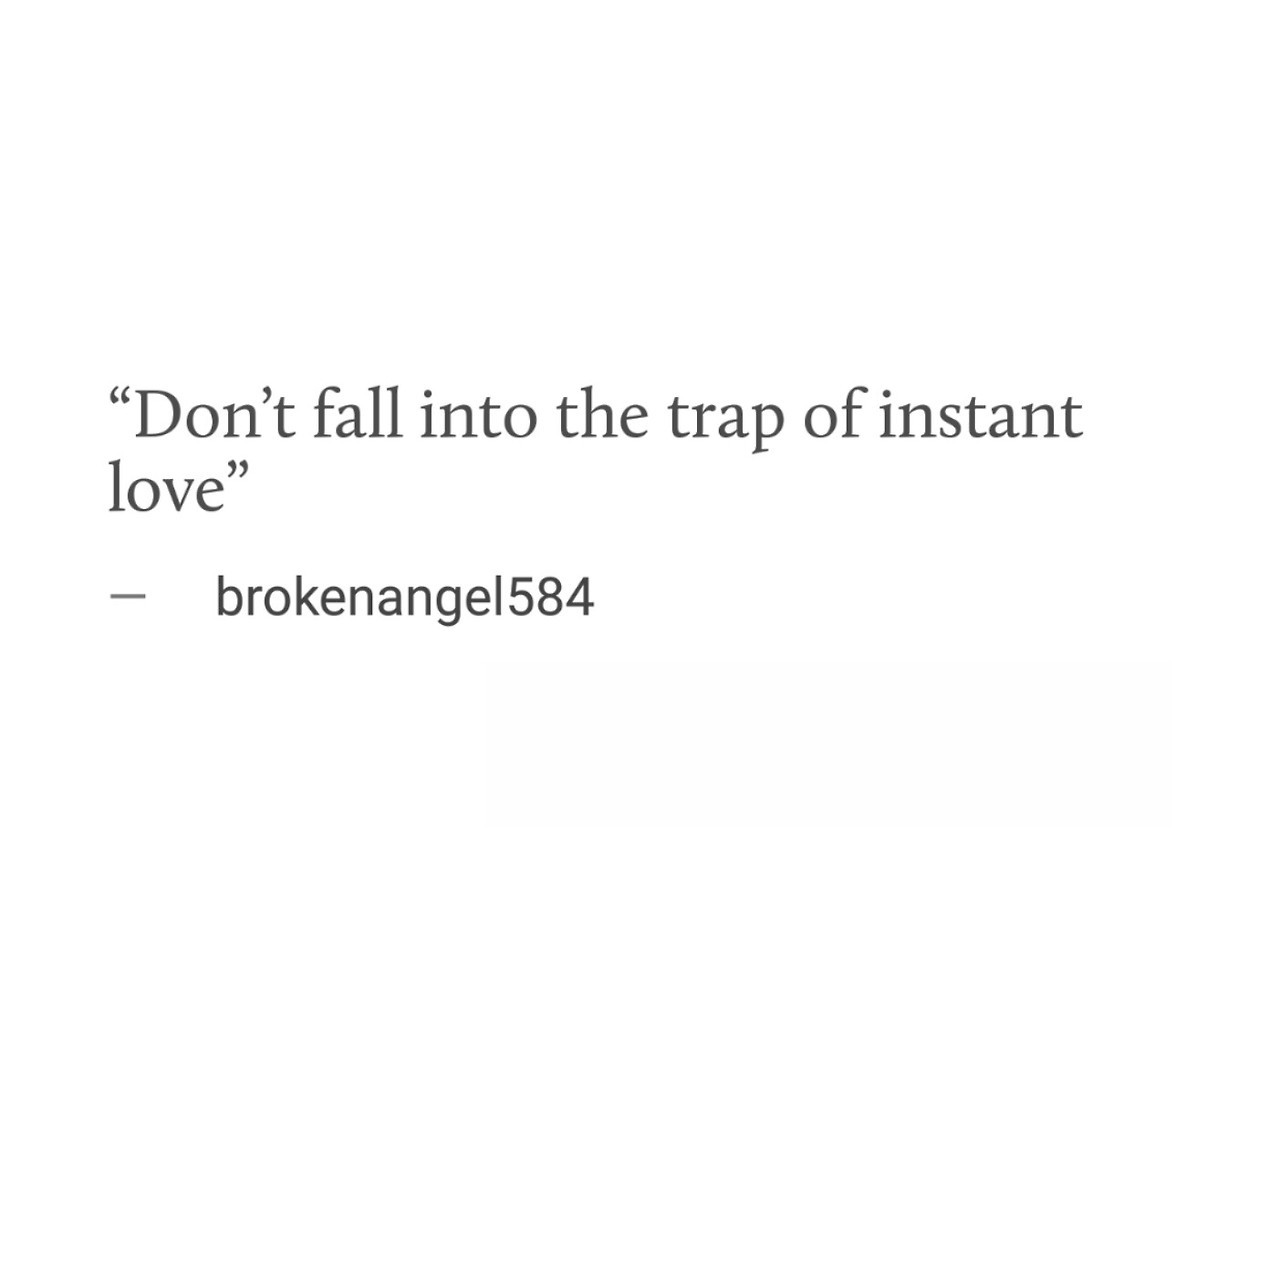 Source brokenangel584 fellings love distance love quotes love quote tumblr instant love fall don t fall for it don t fall into the trap trap love triangle